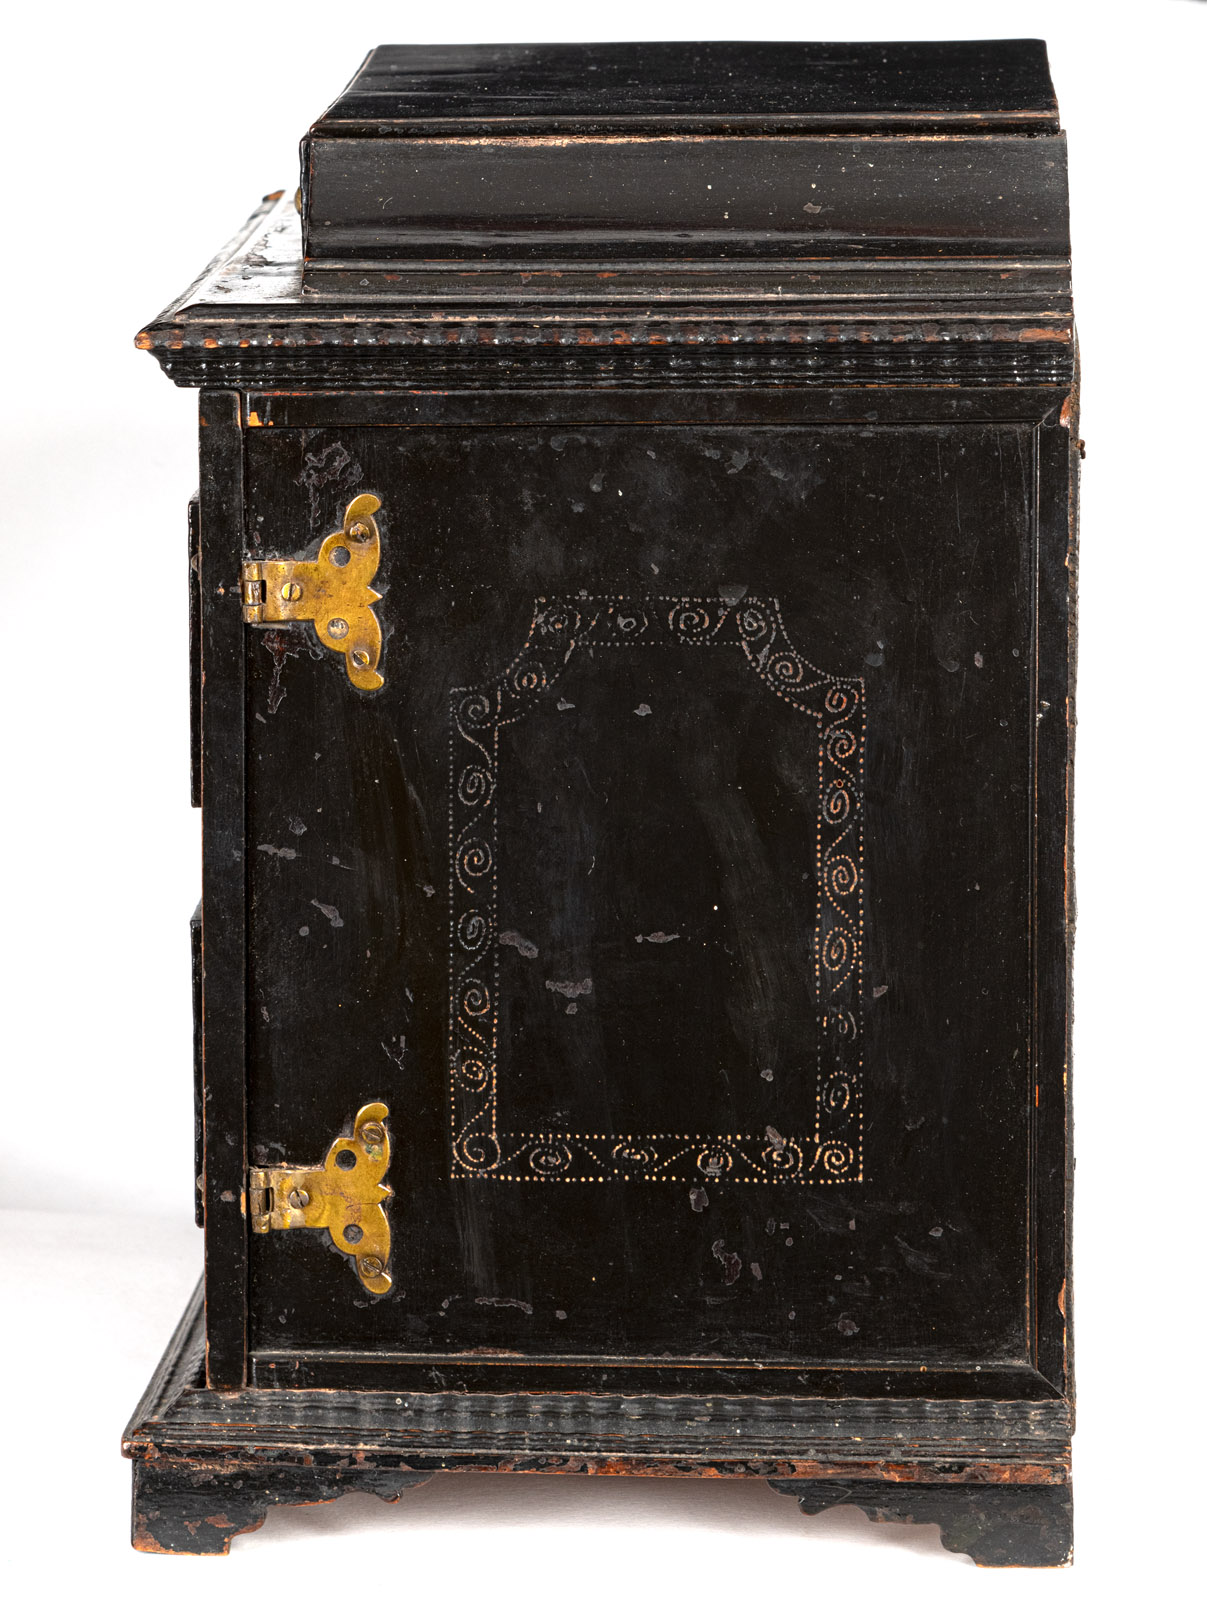 A SOUTH GERMAN EBONIZED AND POLYCHROME PAINTED TABLE CABINET - Image 7 of 7